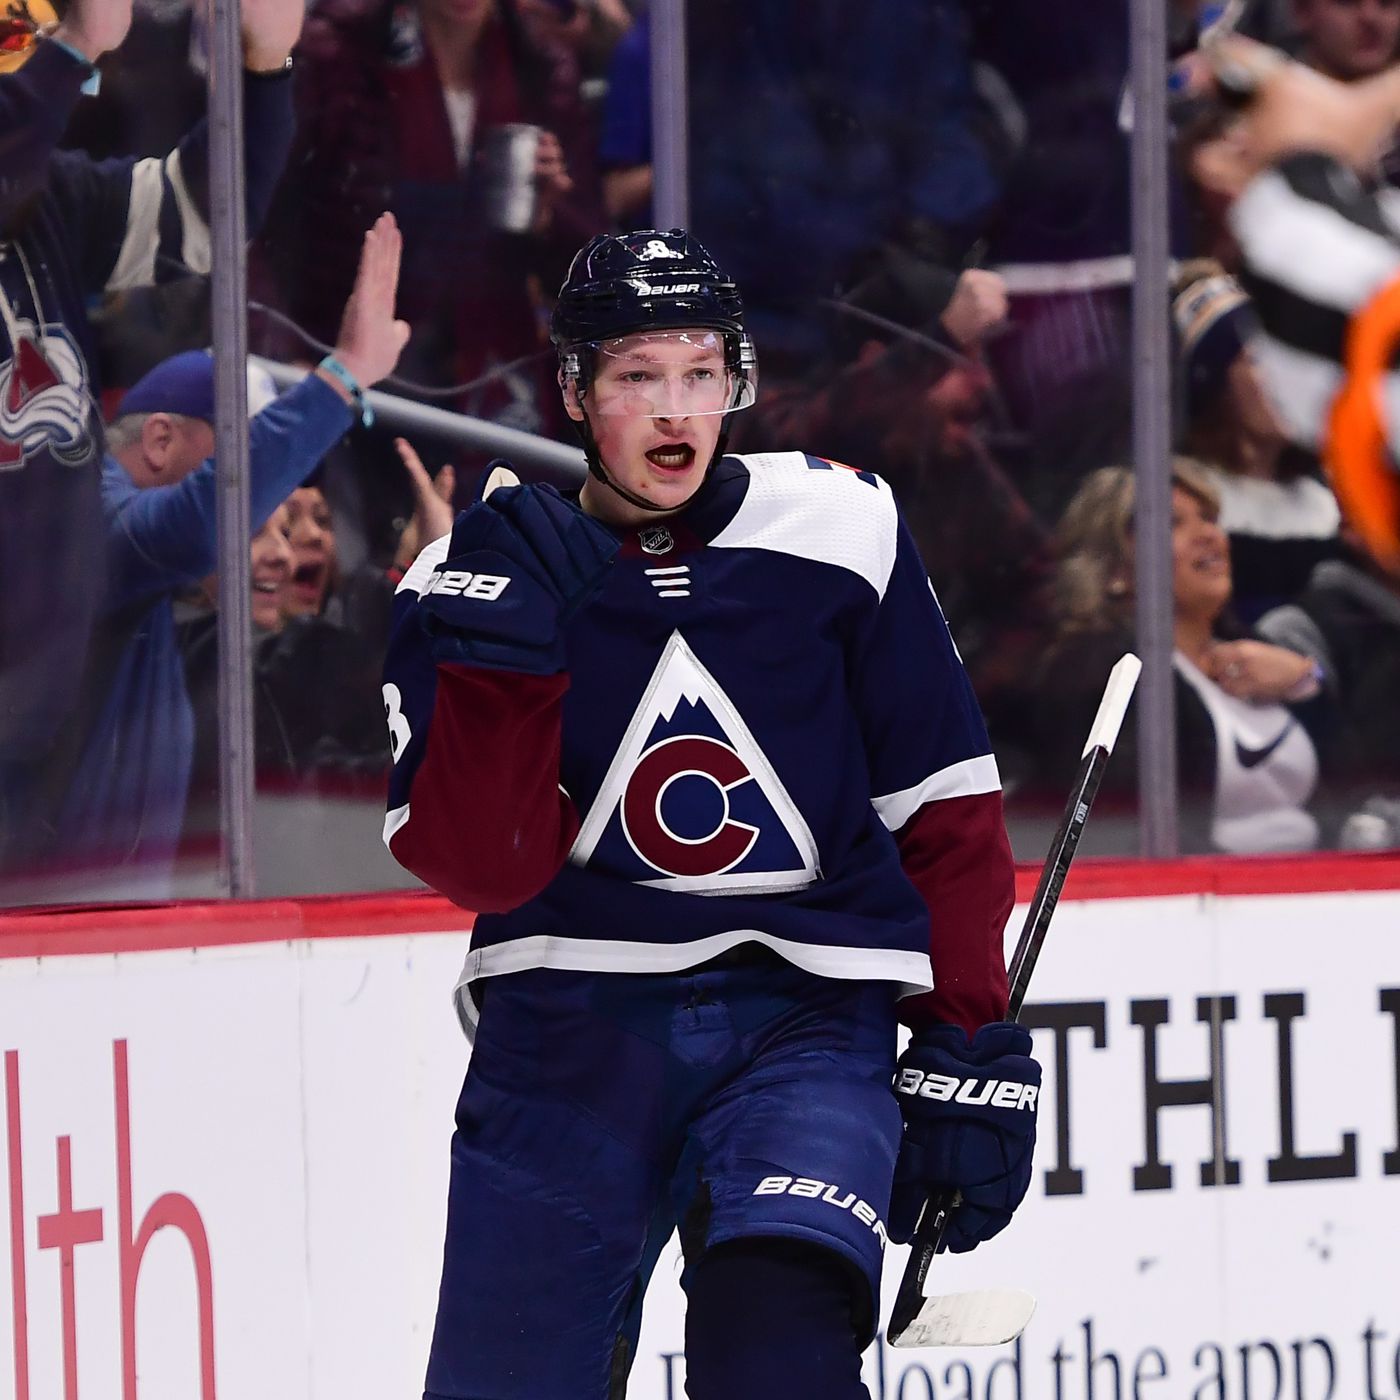 A closer look at Cale Makar's debut and first NHL goal - Mile High Hockey